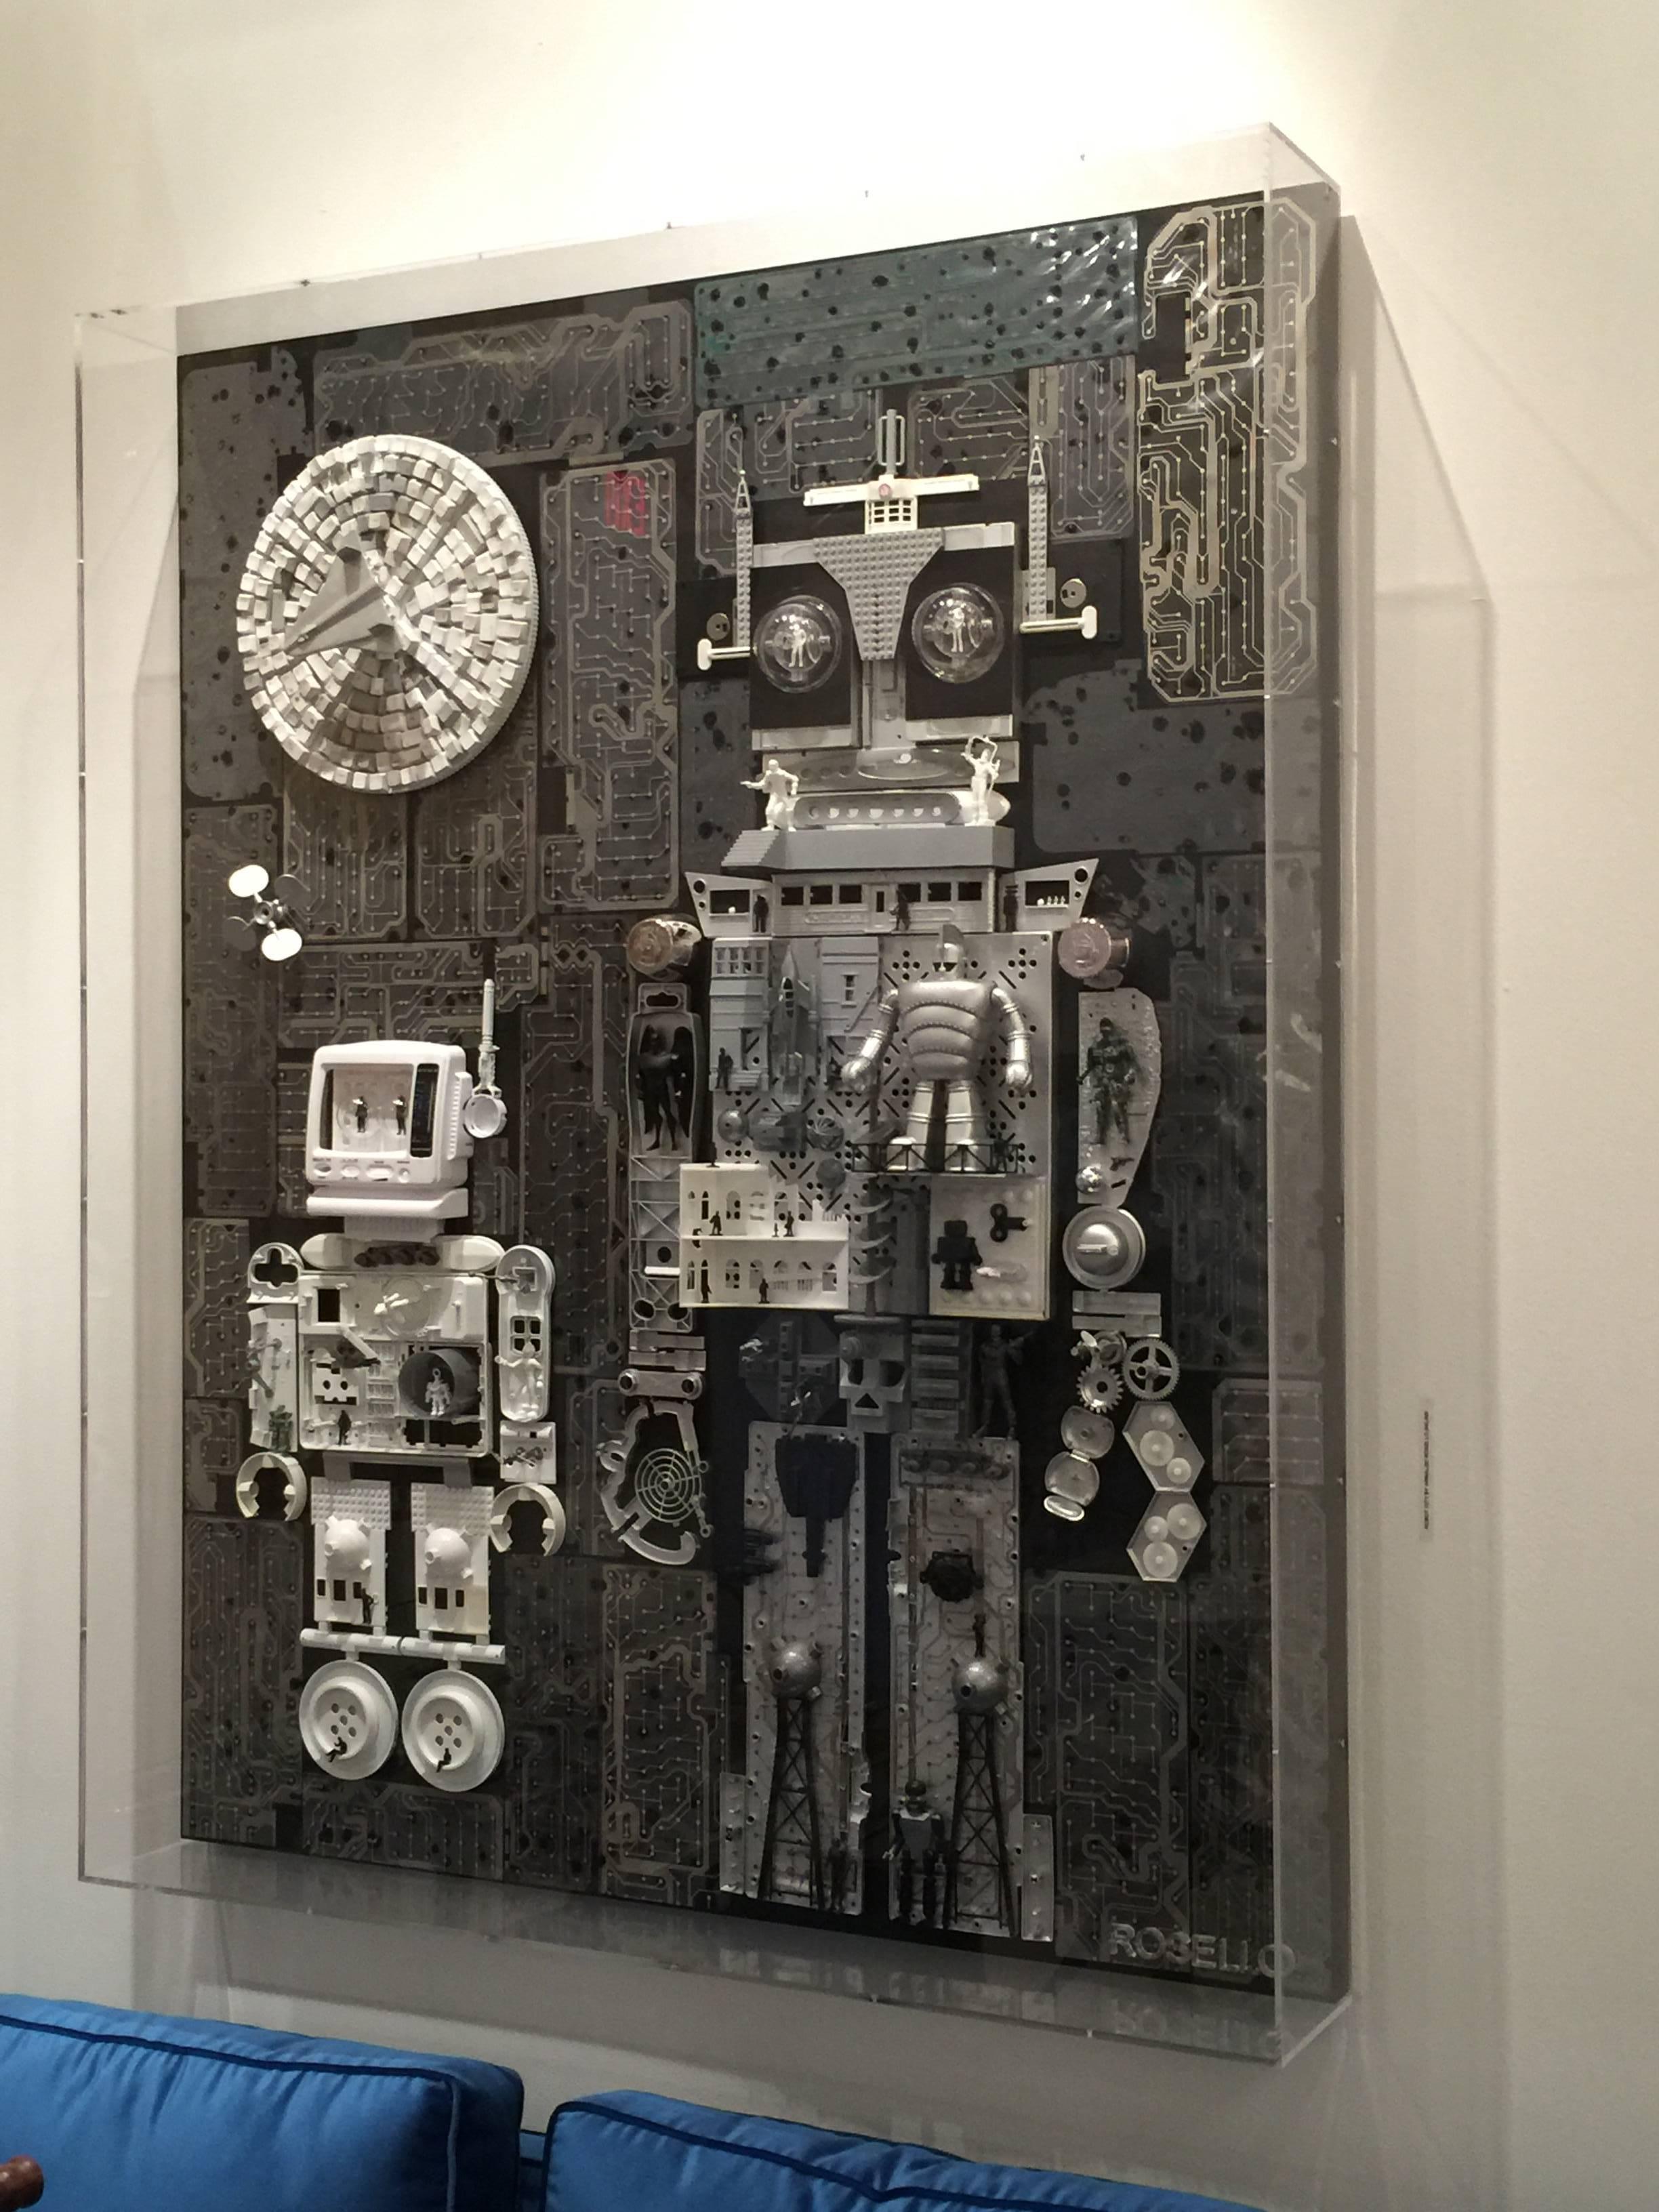 Upcycled computer parts (mother boards, keyboards, etc), vintage toys and unique elements - this is a large wall sculpture beautifully encased in Lucite box. Artist is a Miami native named Rosello.

This wonderful boxed sculpture is